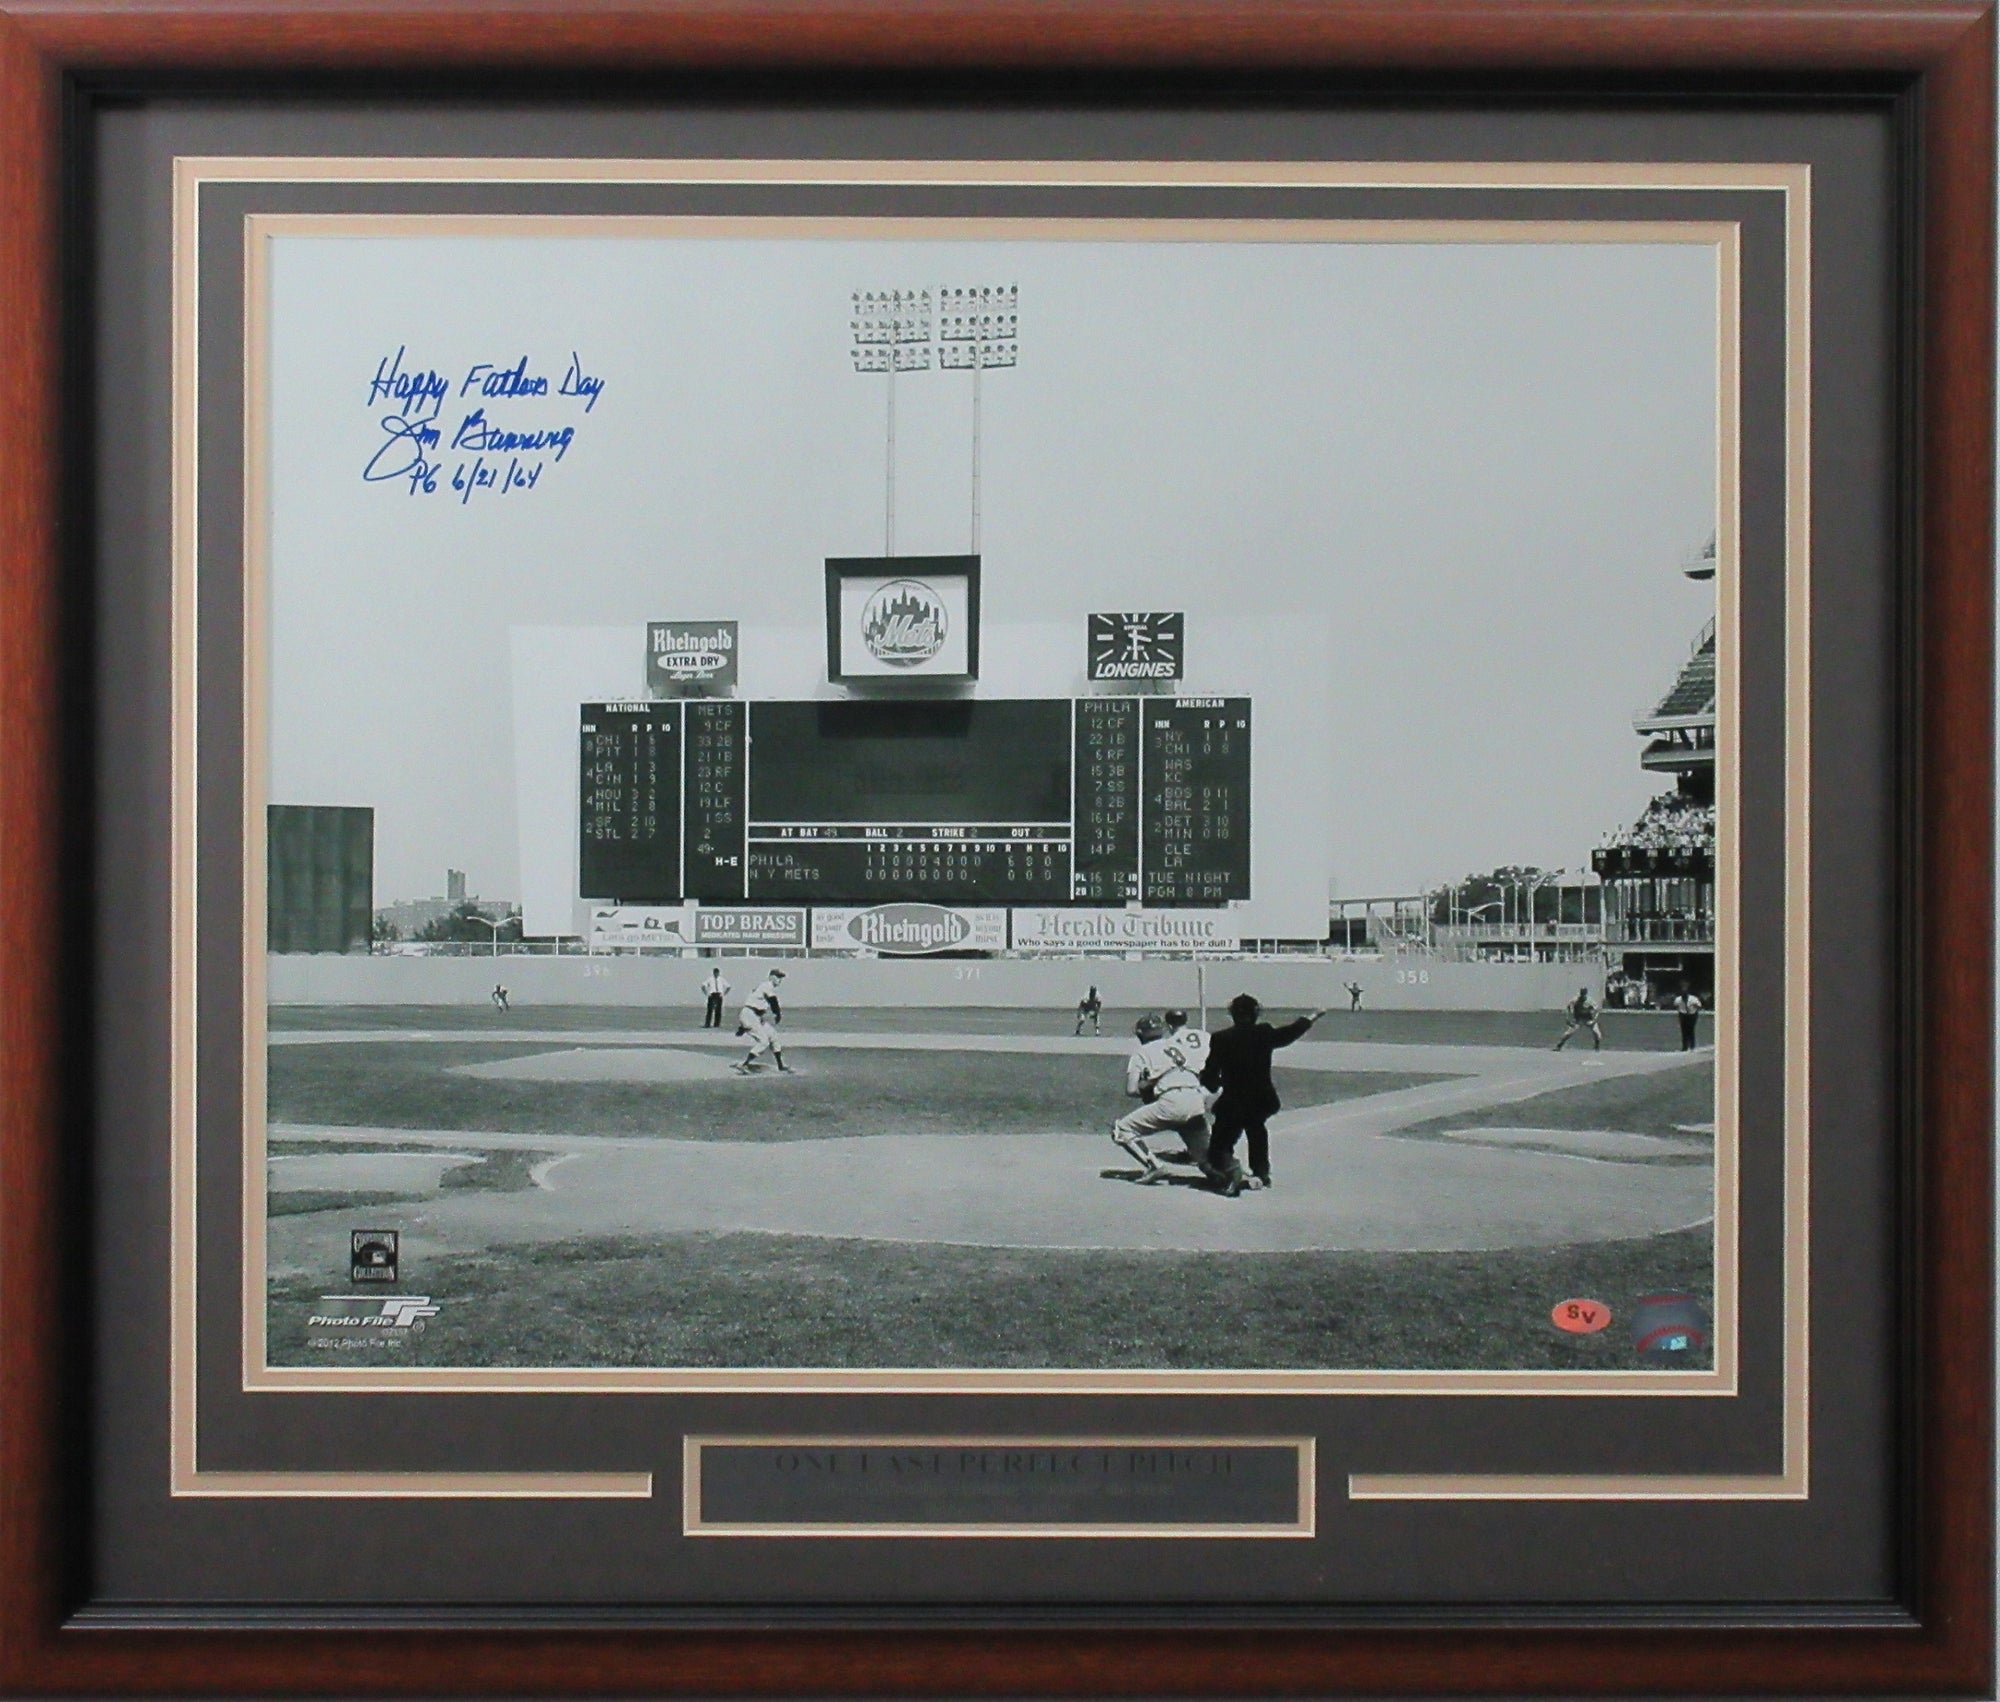 Jim Bunning 16x20 Autographed "Perfect Game" inscribed "Happy Father's Day"Photo Framed